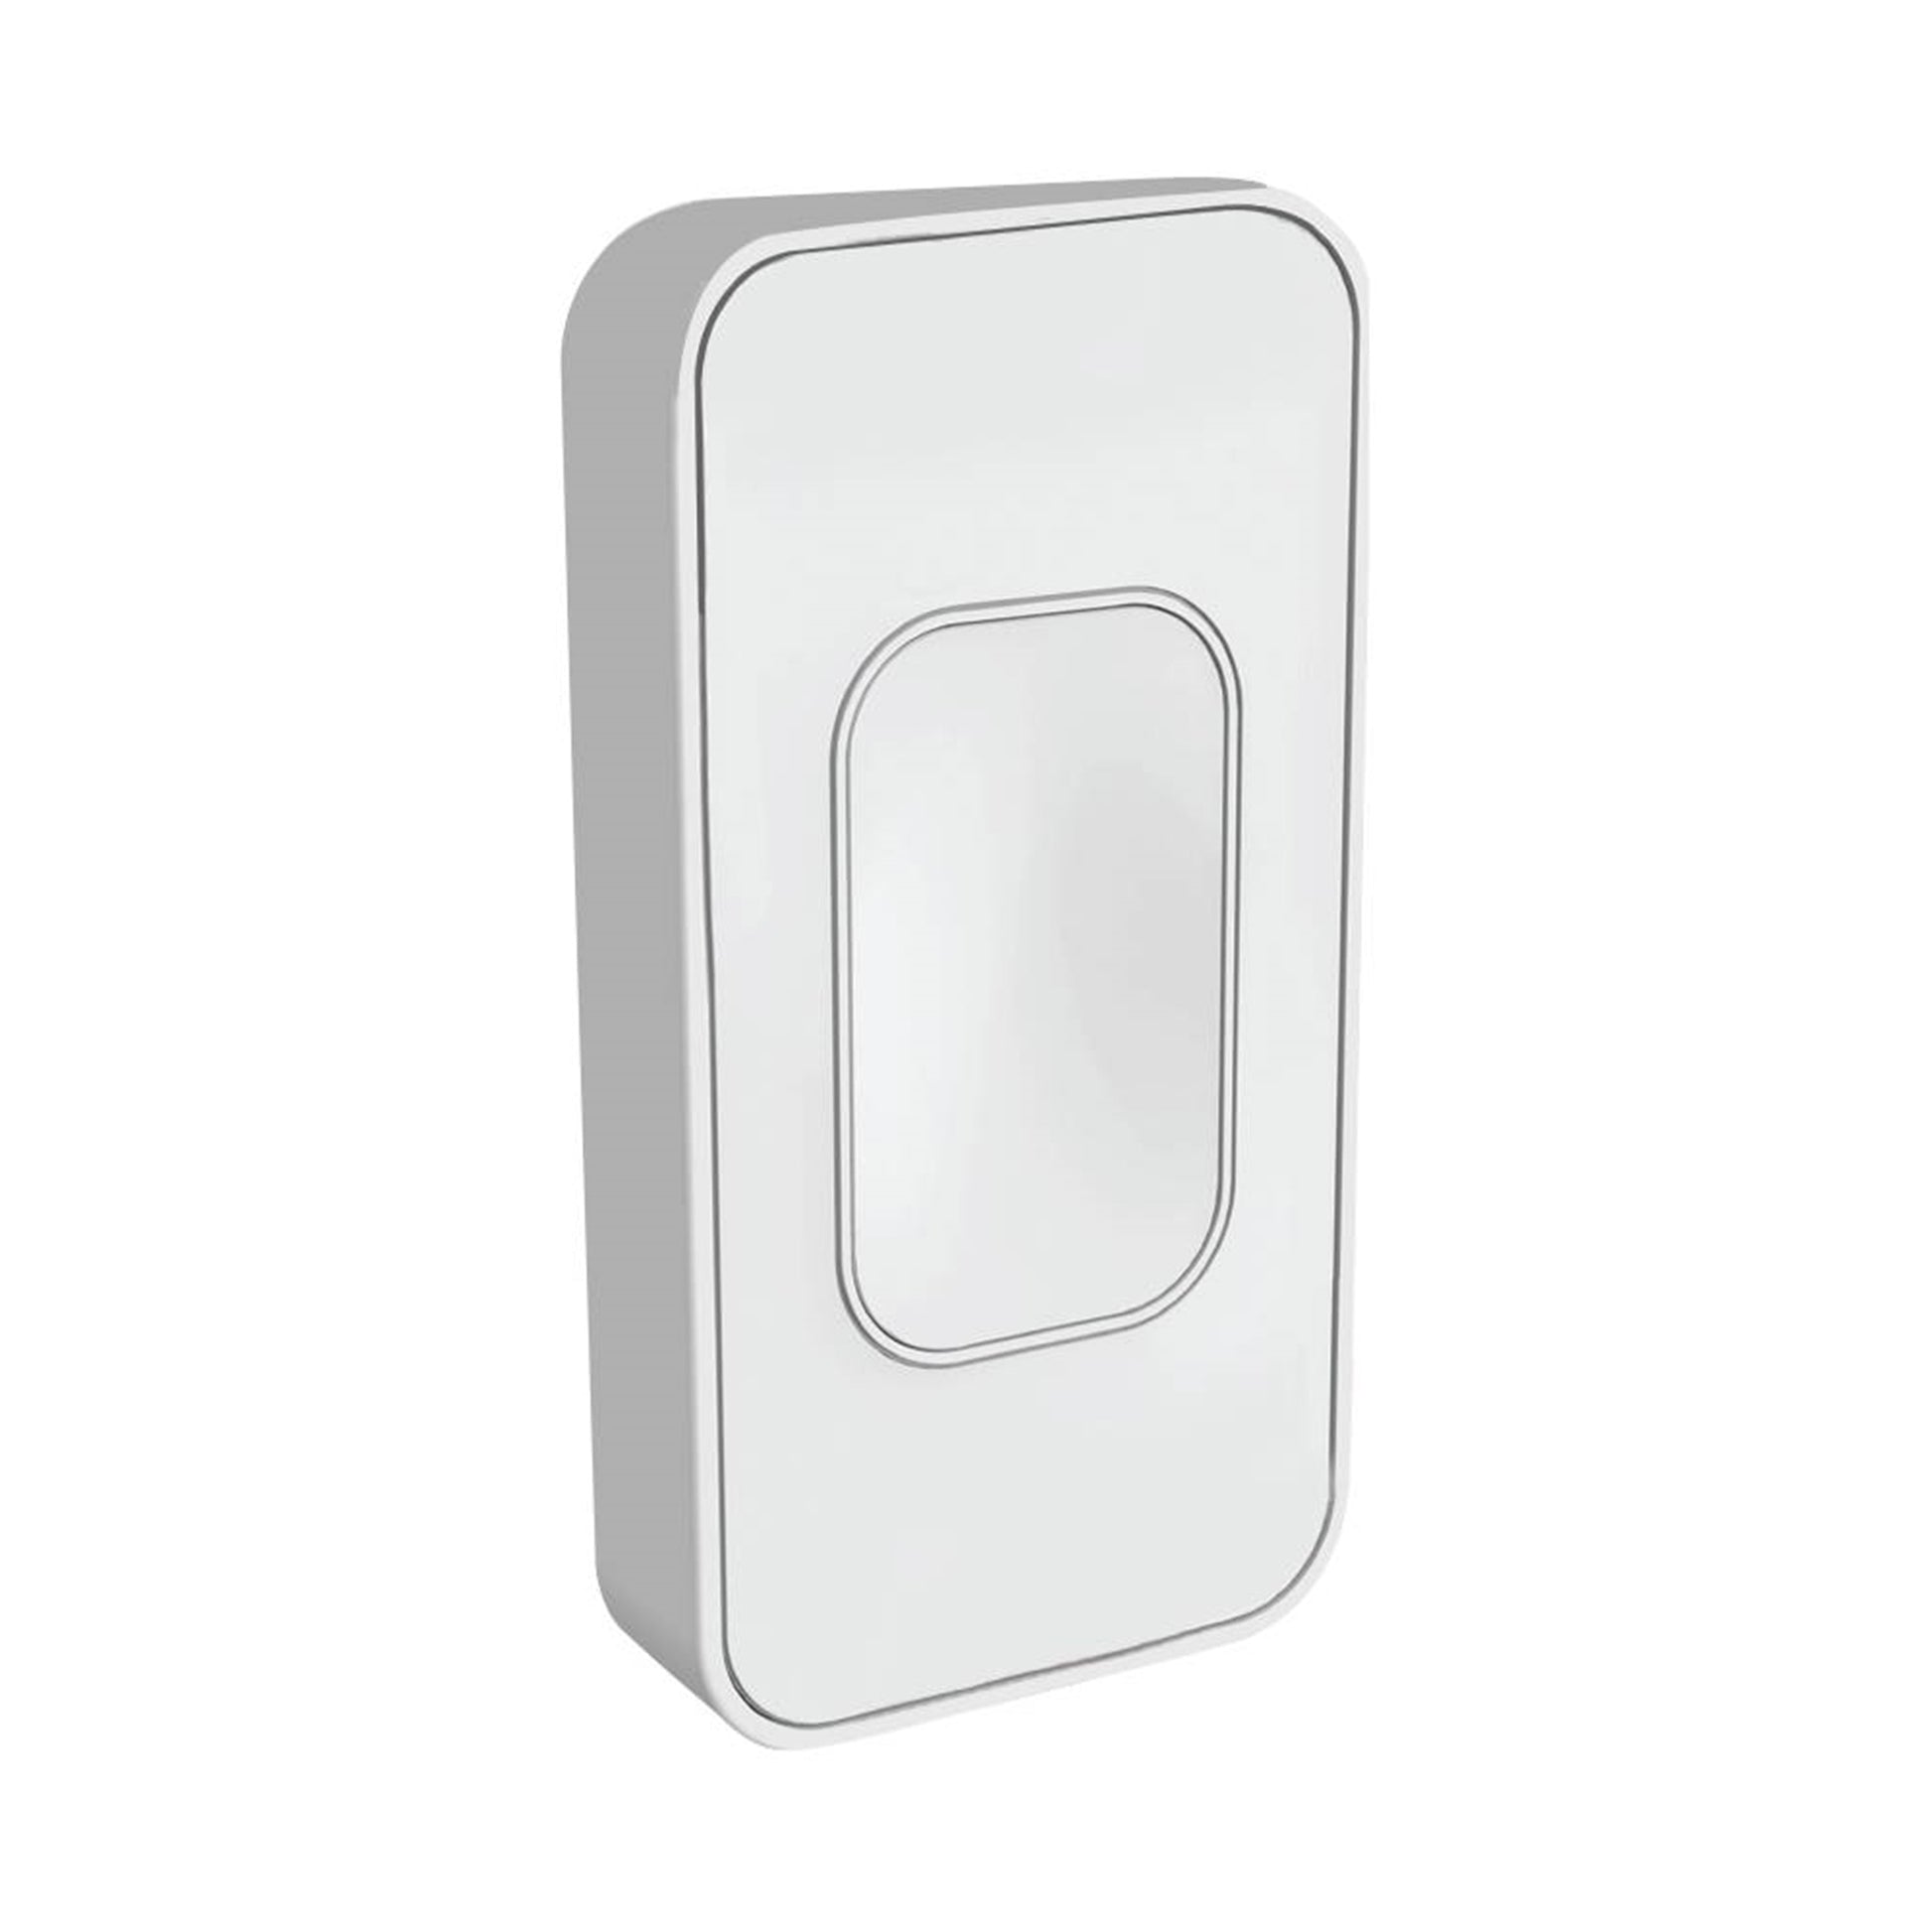 SimplySmartHome by Switchmate Smart Light Switch 2.0 for Toggle Style Light Switches - Warehouse B